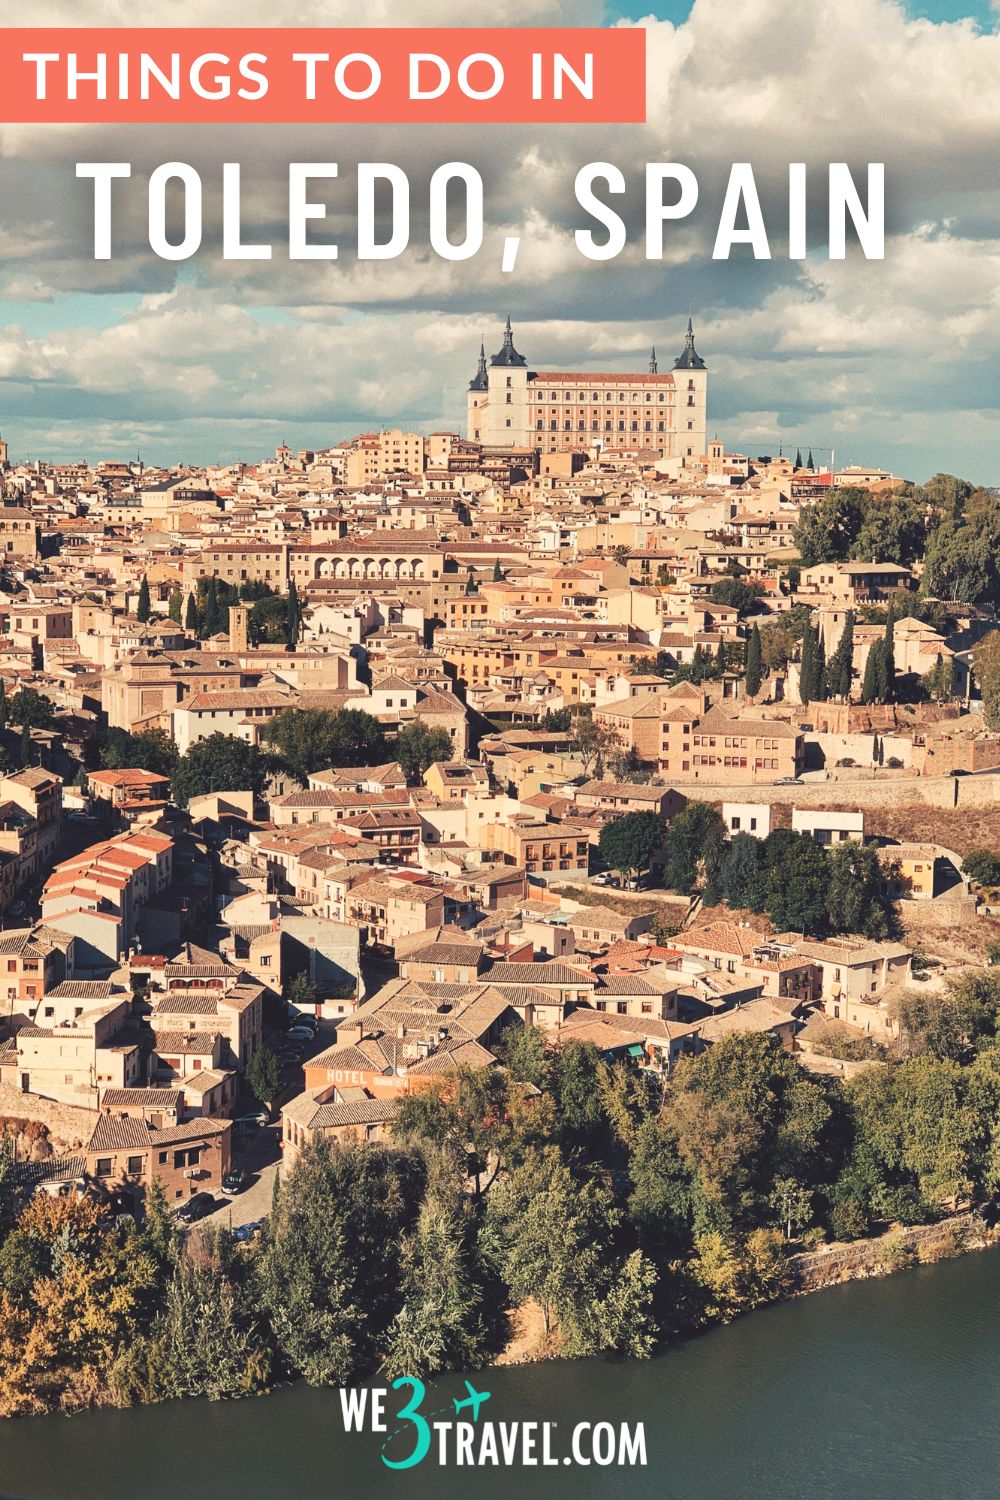 When planning a vacation to Spain, be sure to include a day trip to Toledo from Madrid on your trip itinerary. Called the 